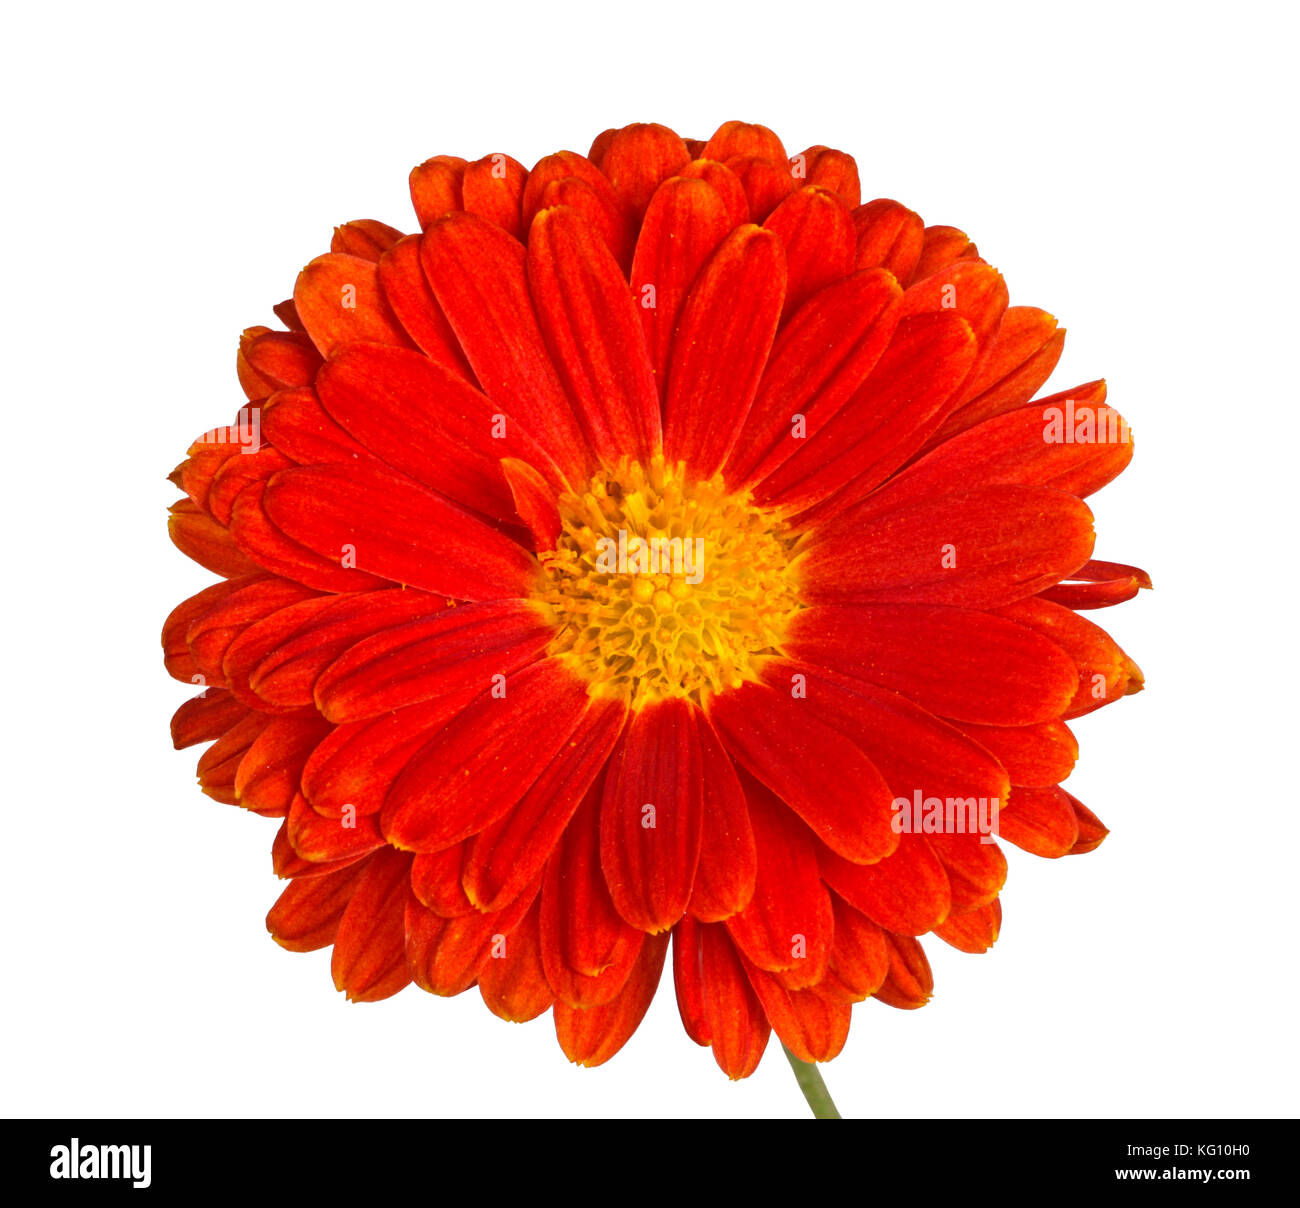 Small stem an orange and yellow flower of the fall chrysanthemum (Chrysanthemum indicum) isolated against a white background Stock Photo